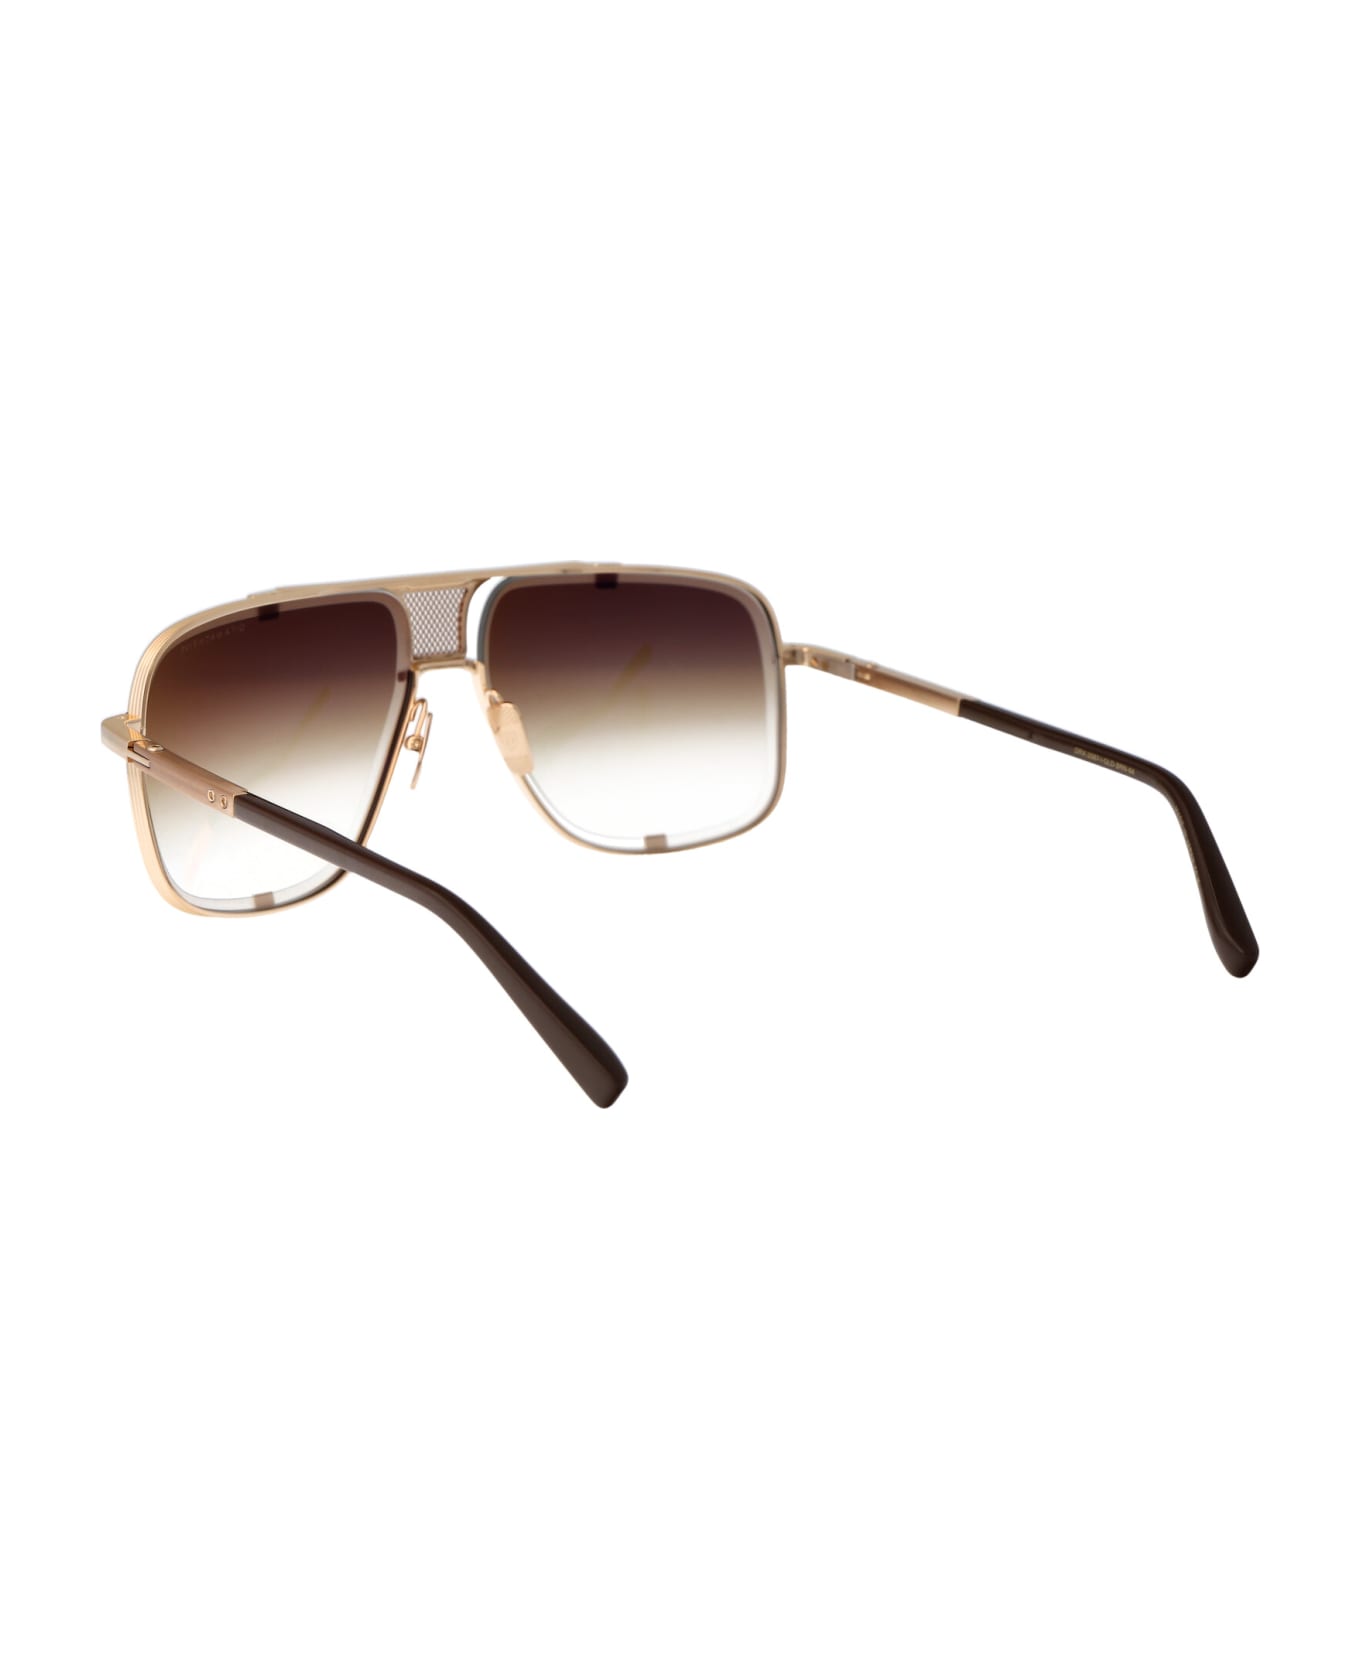 Dita Mach-five Sunglasses - Brushed White Gold - Brown w/ Brown Gradient